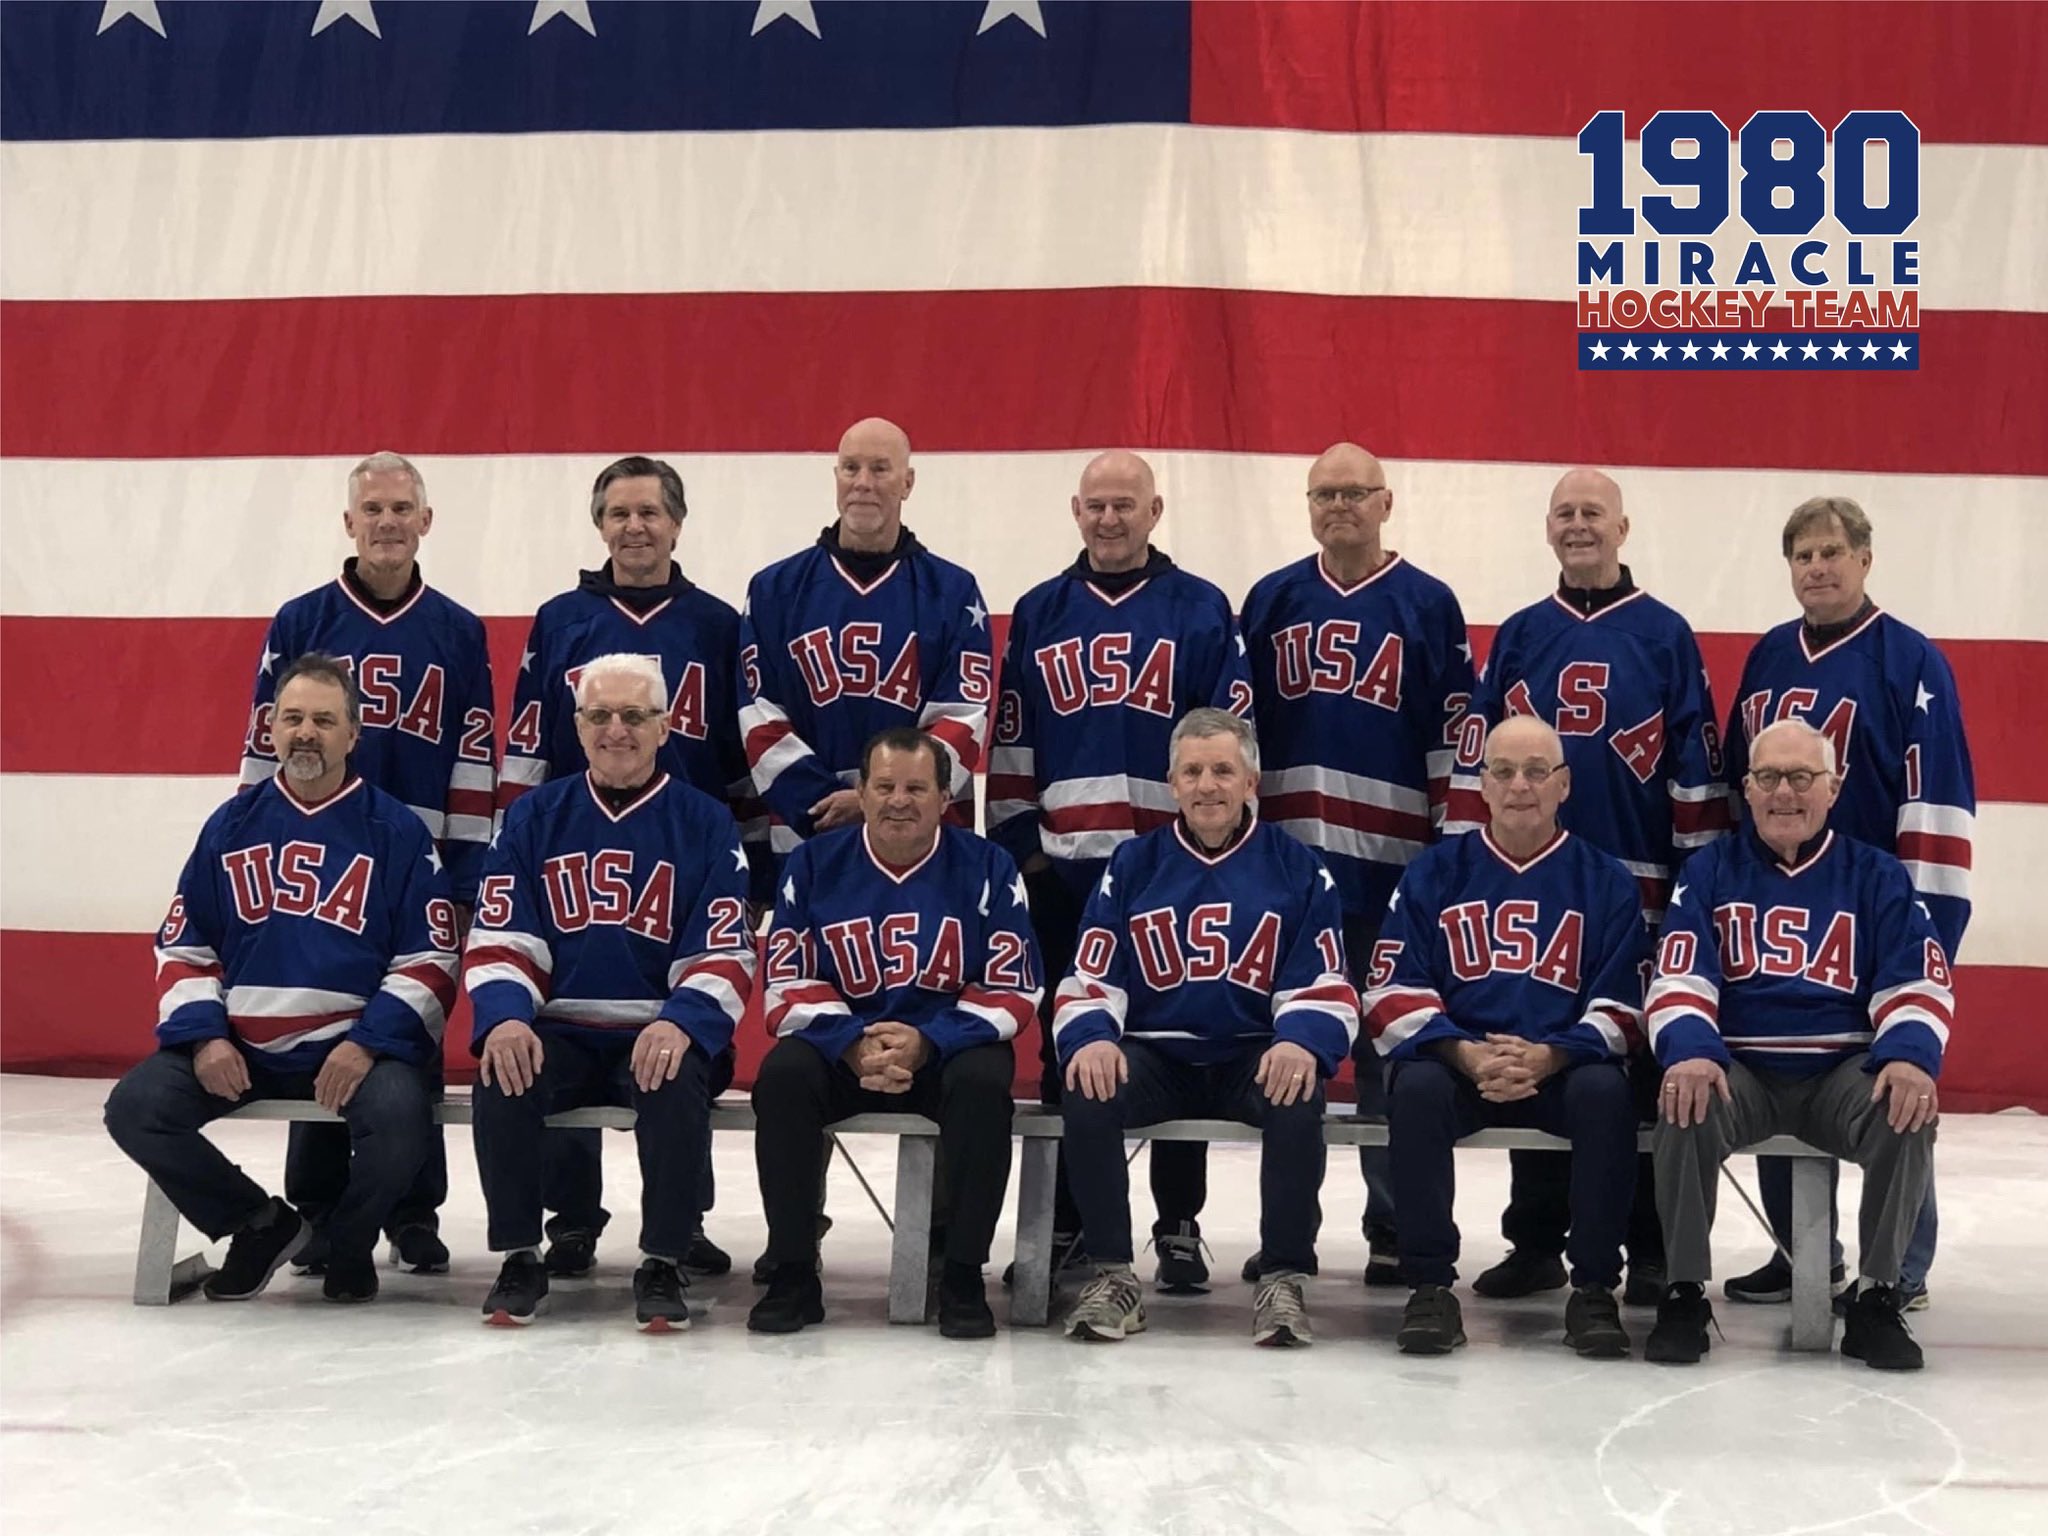 Miracle on Ice re-lived at fantasy camp in Lake Placid